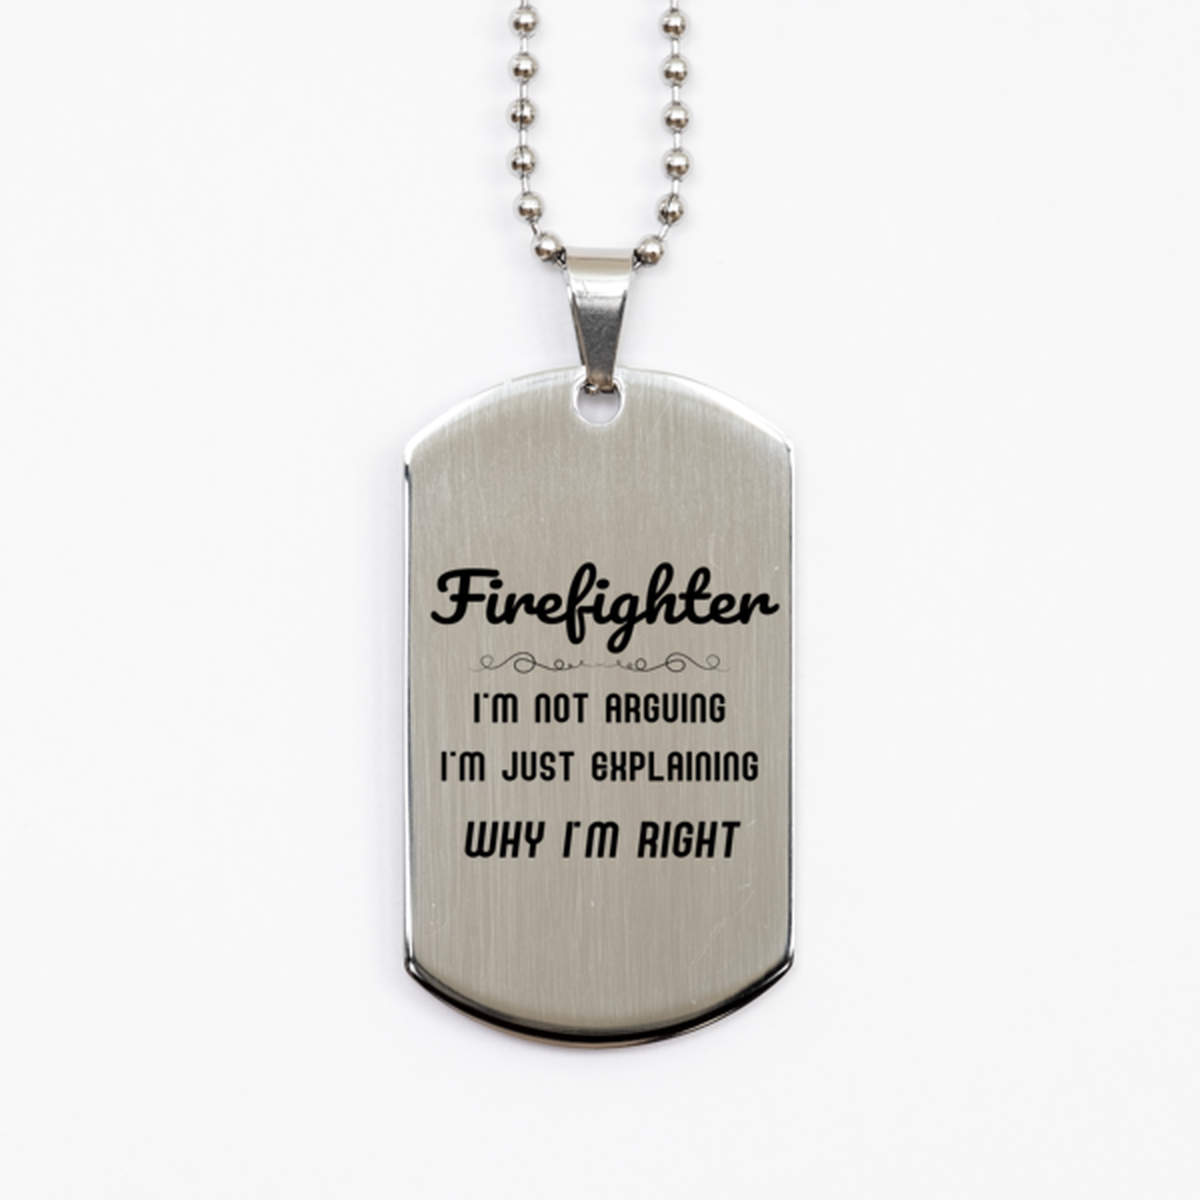 Firefighter I'm not Arguing. I'm Just Explaining Why I'm RIGHT Silver Dog Tag, Funny Saying Quote Firefighter Gifts For Firefighter Graduation Birthday Christmas Gifts for Men Women Coworker